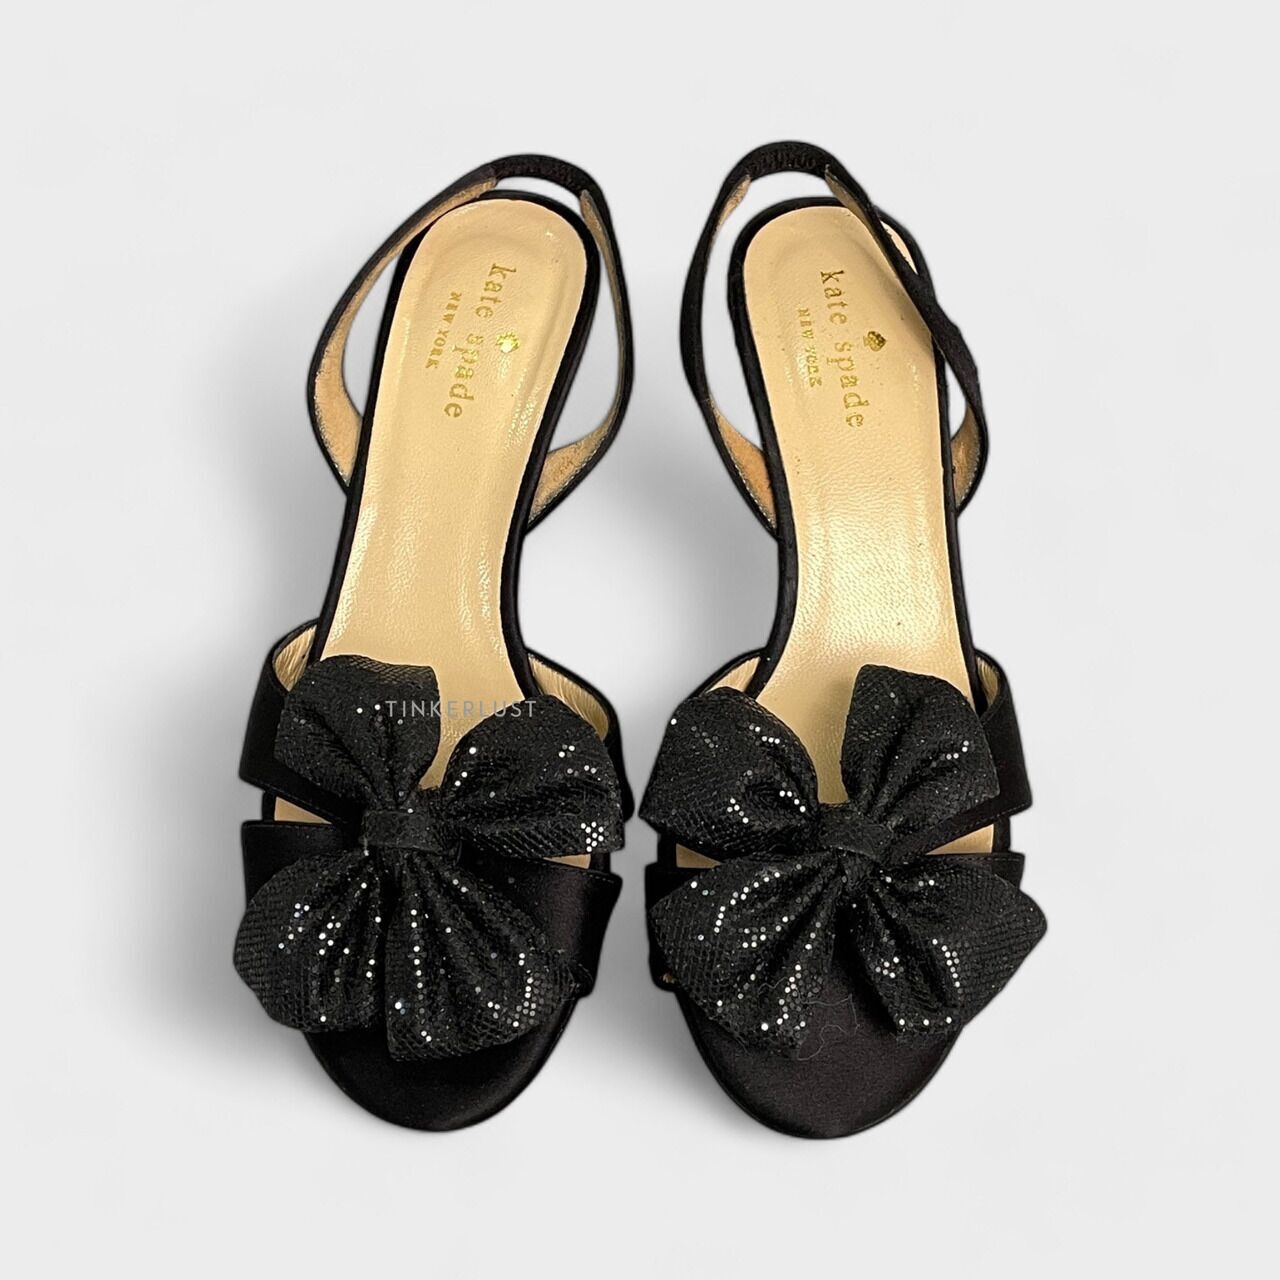 Kate Spade Black Bow Accents Slingback Heels